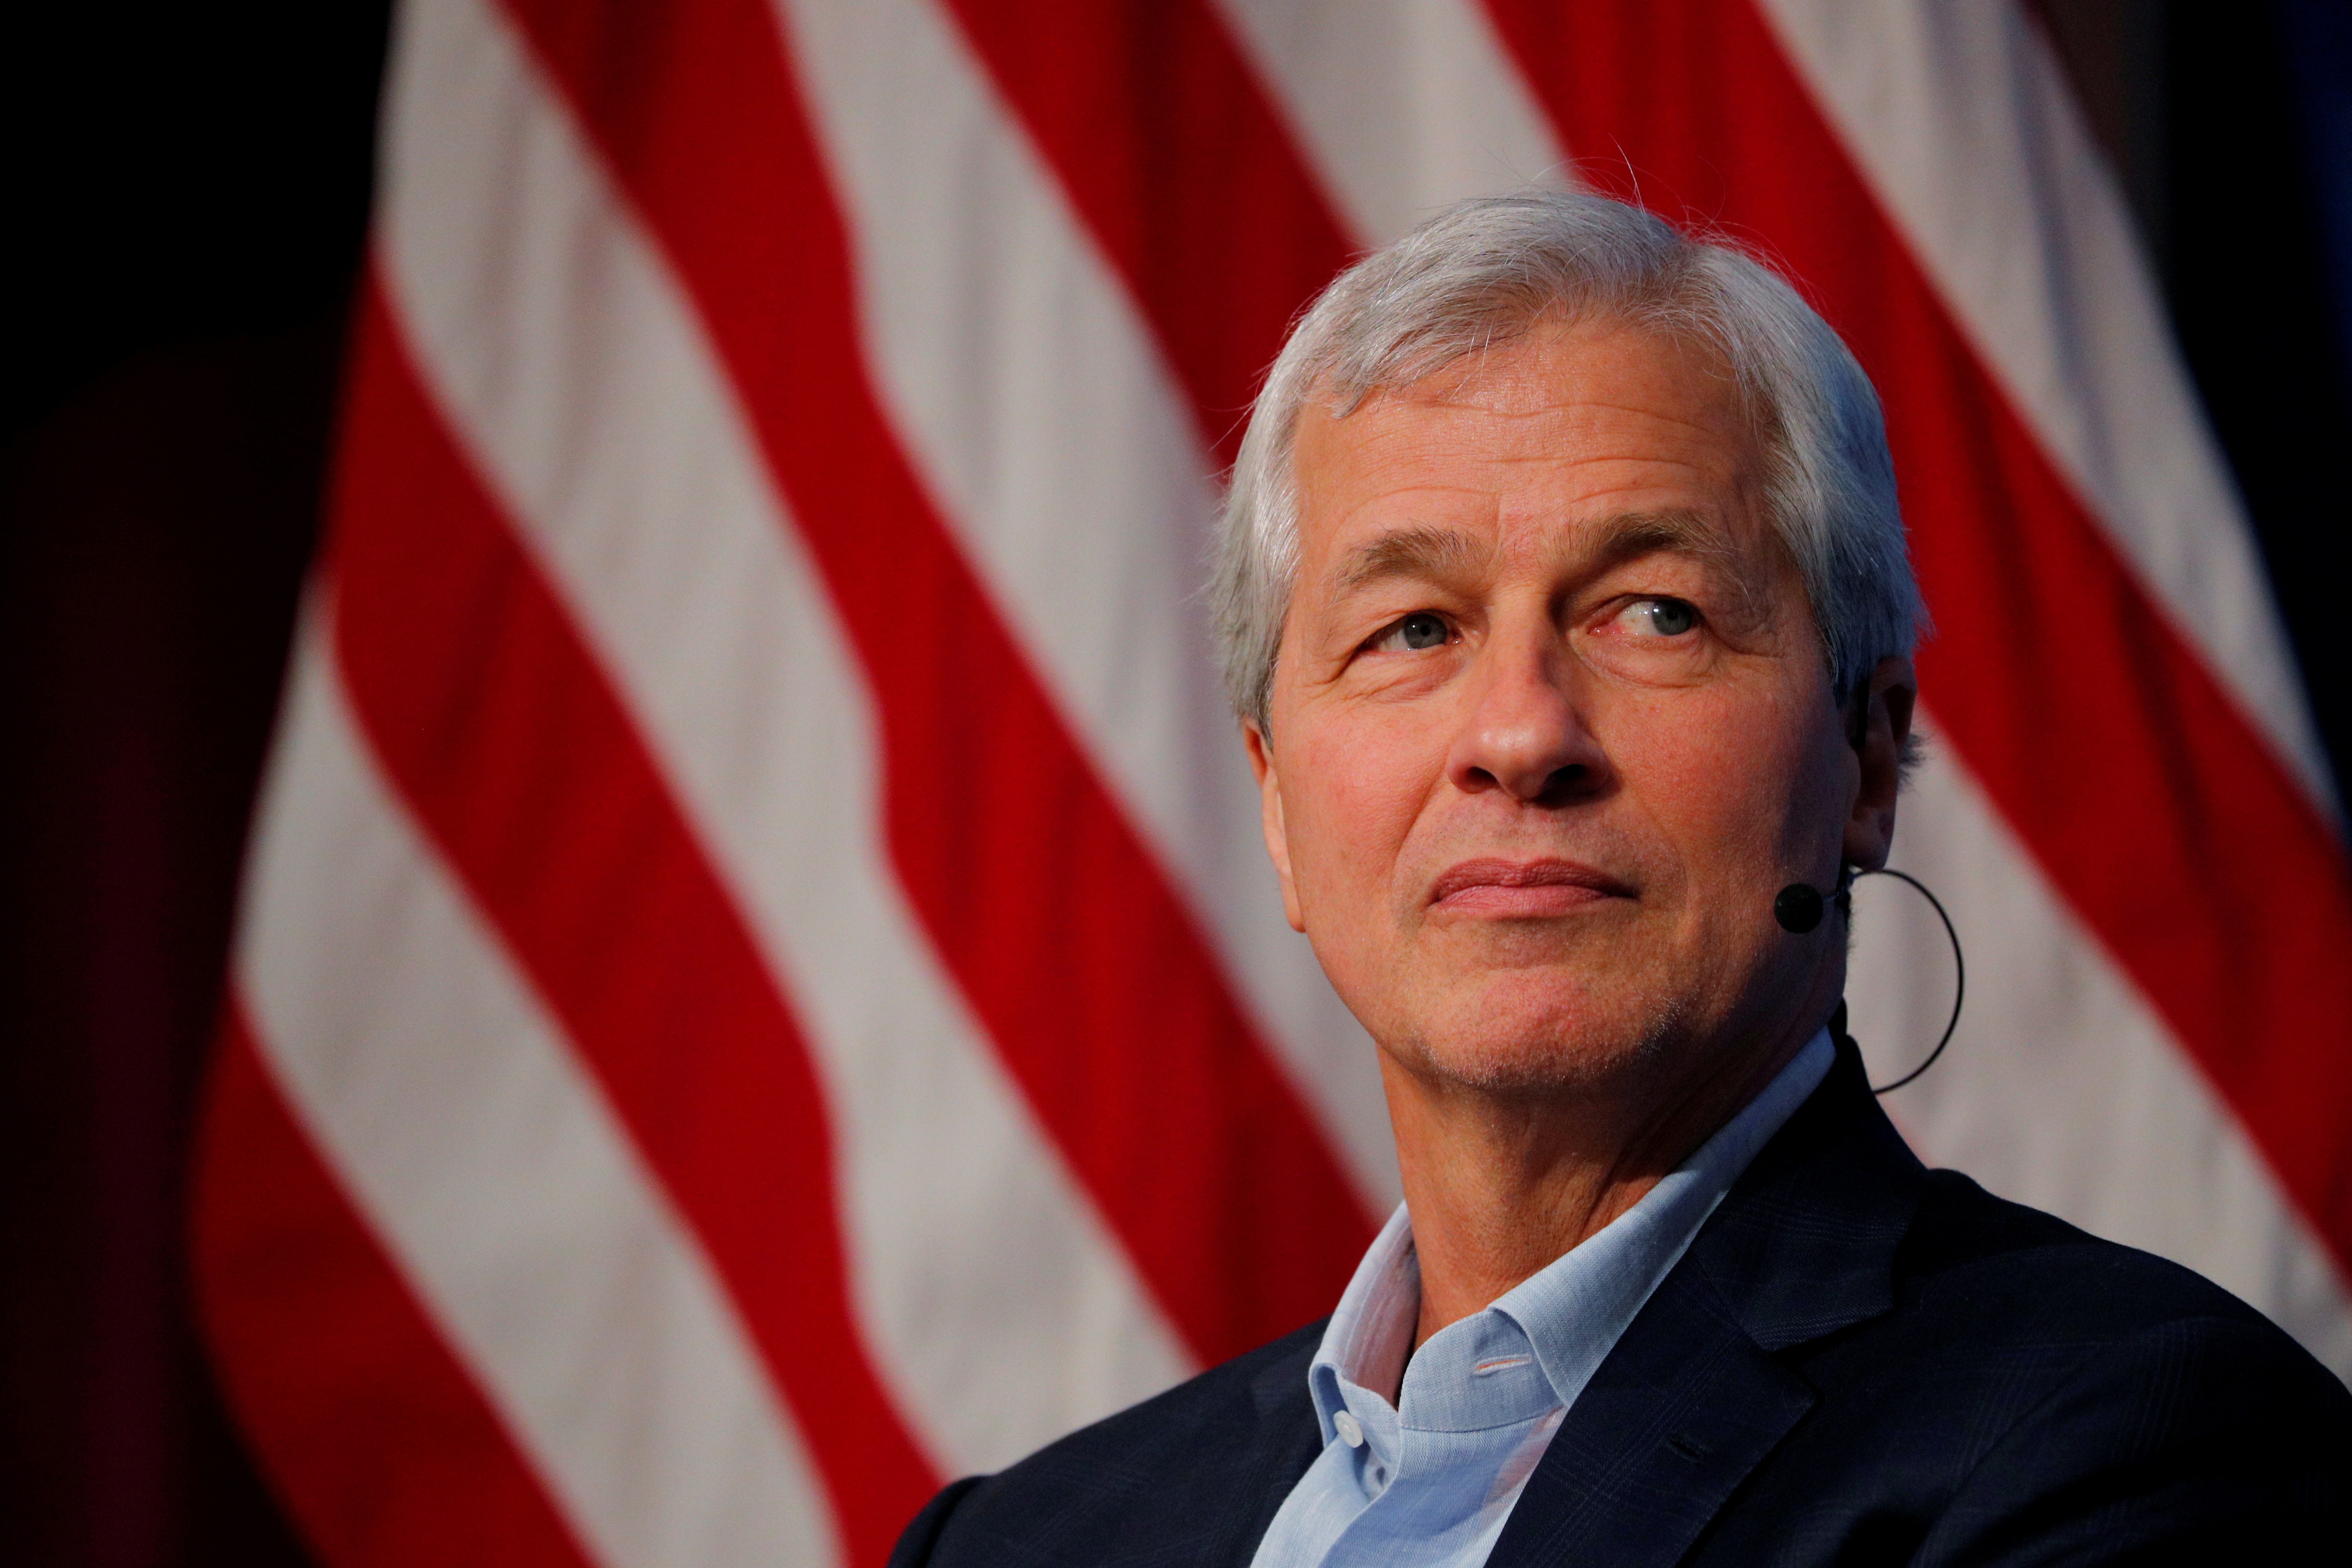 Dimon, CEO of JPMorgan Chase, takes part in a panel discussion about investing in Detroit during a panel discussion at the Kennedy School of Government at Harvard University in Cambridge